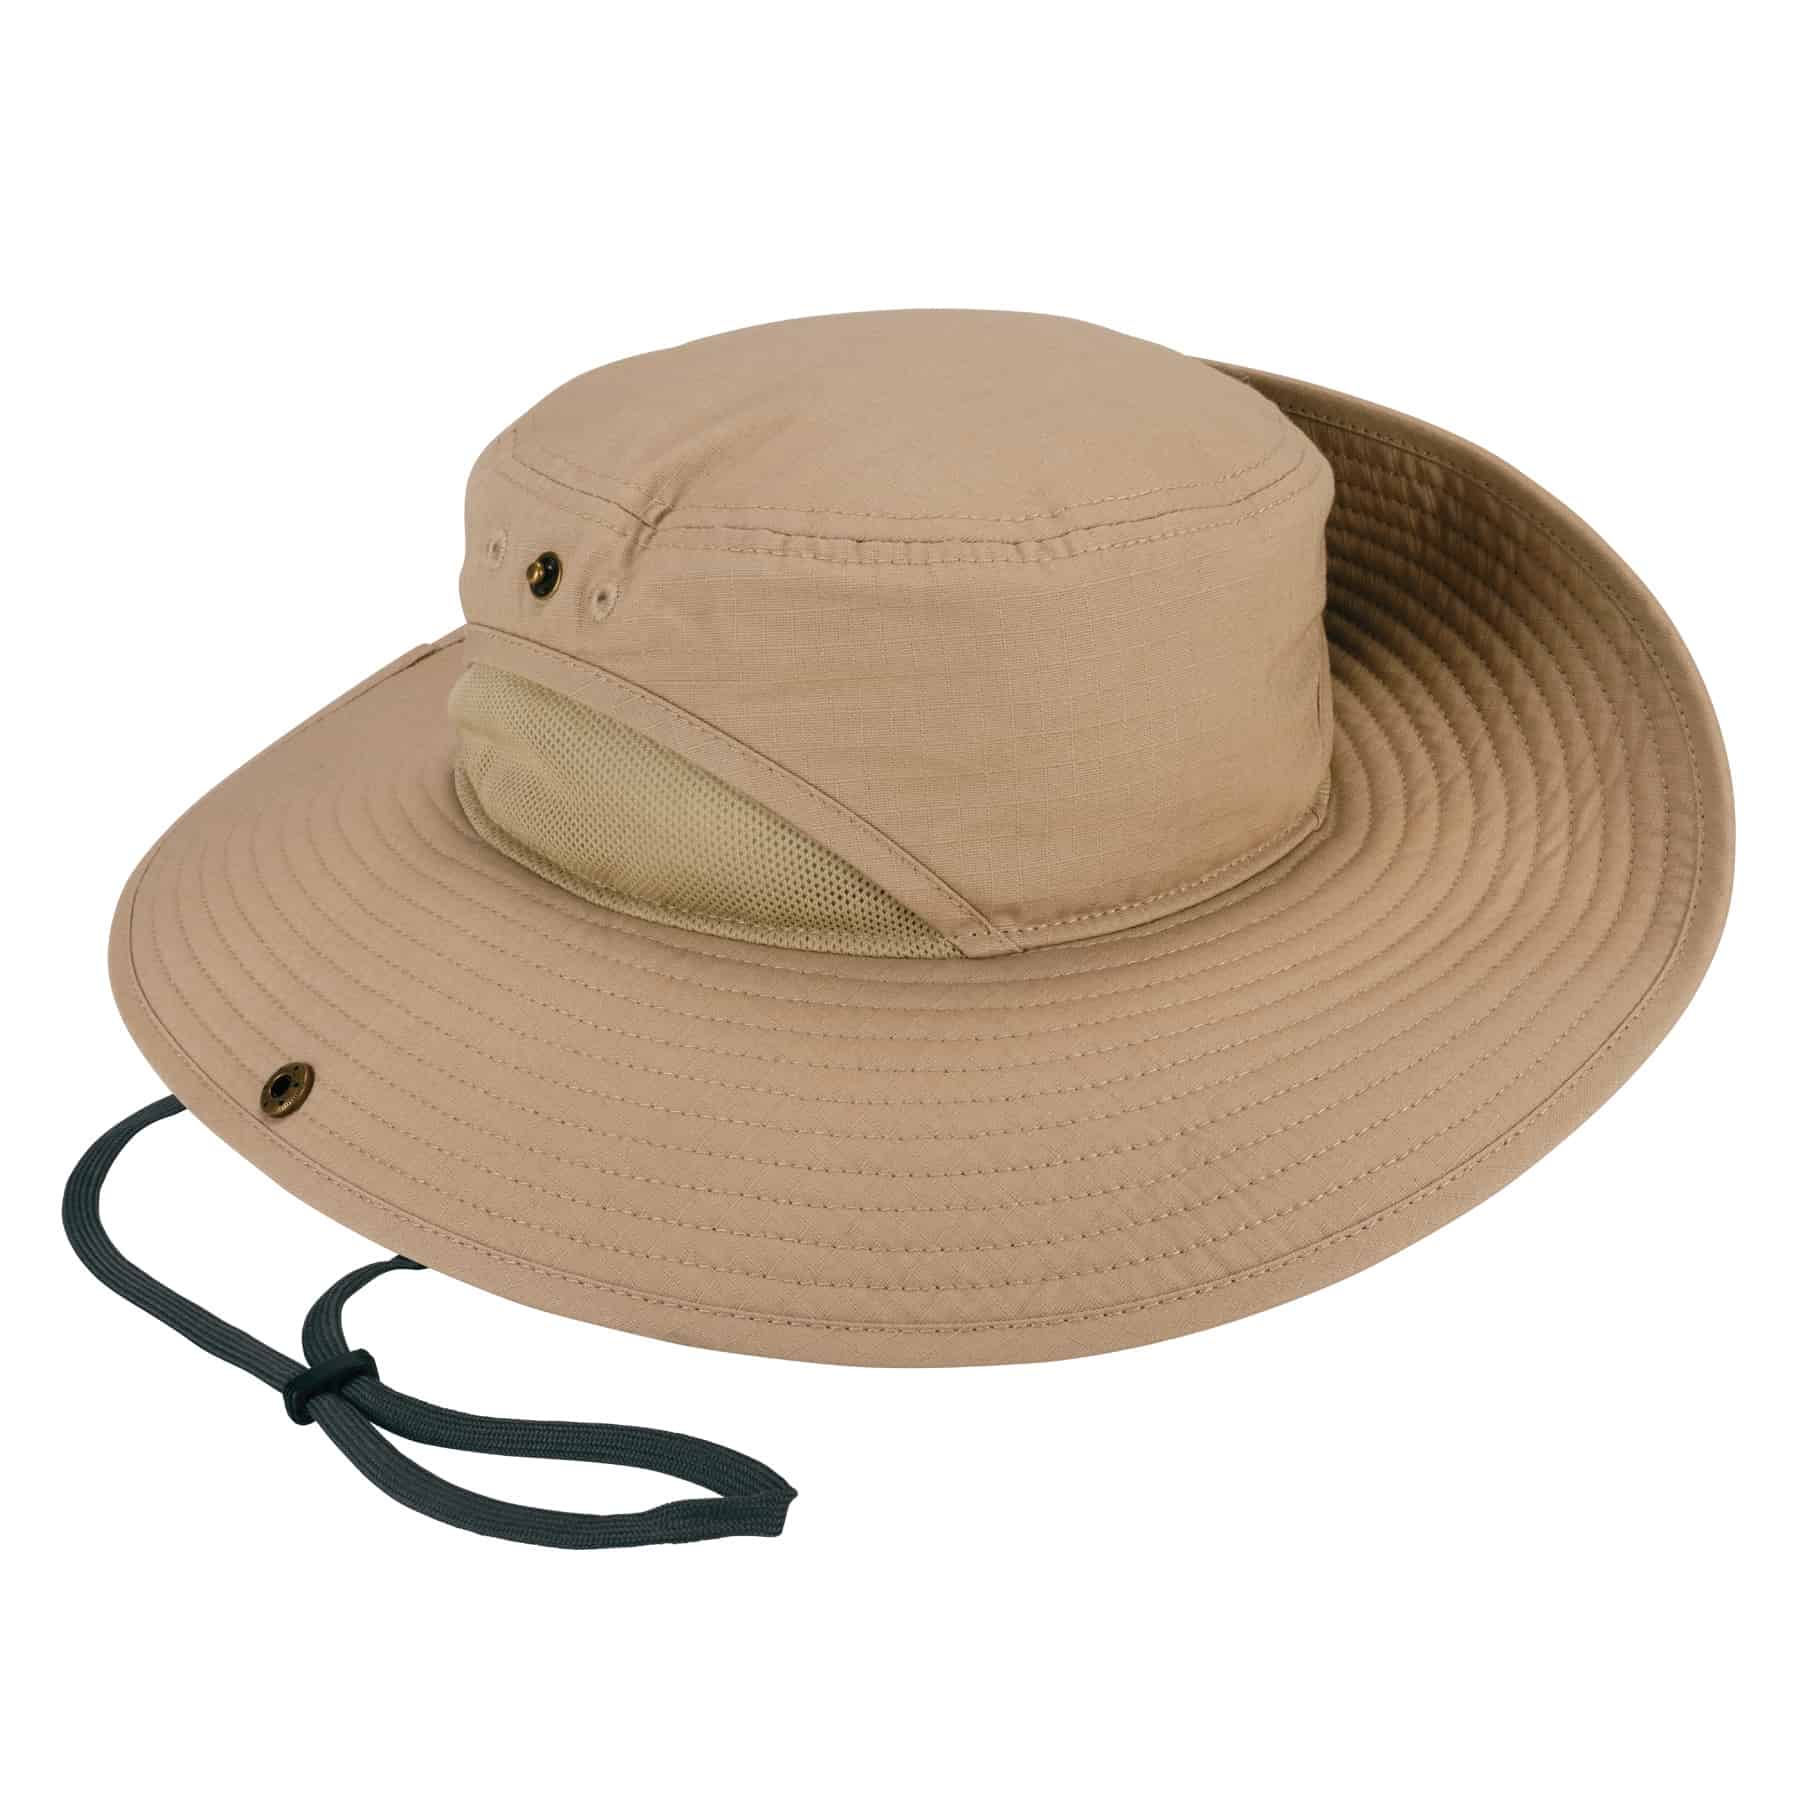 Mission Cooling Bucket Hat for Men & Women, One Size, Khaki